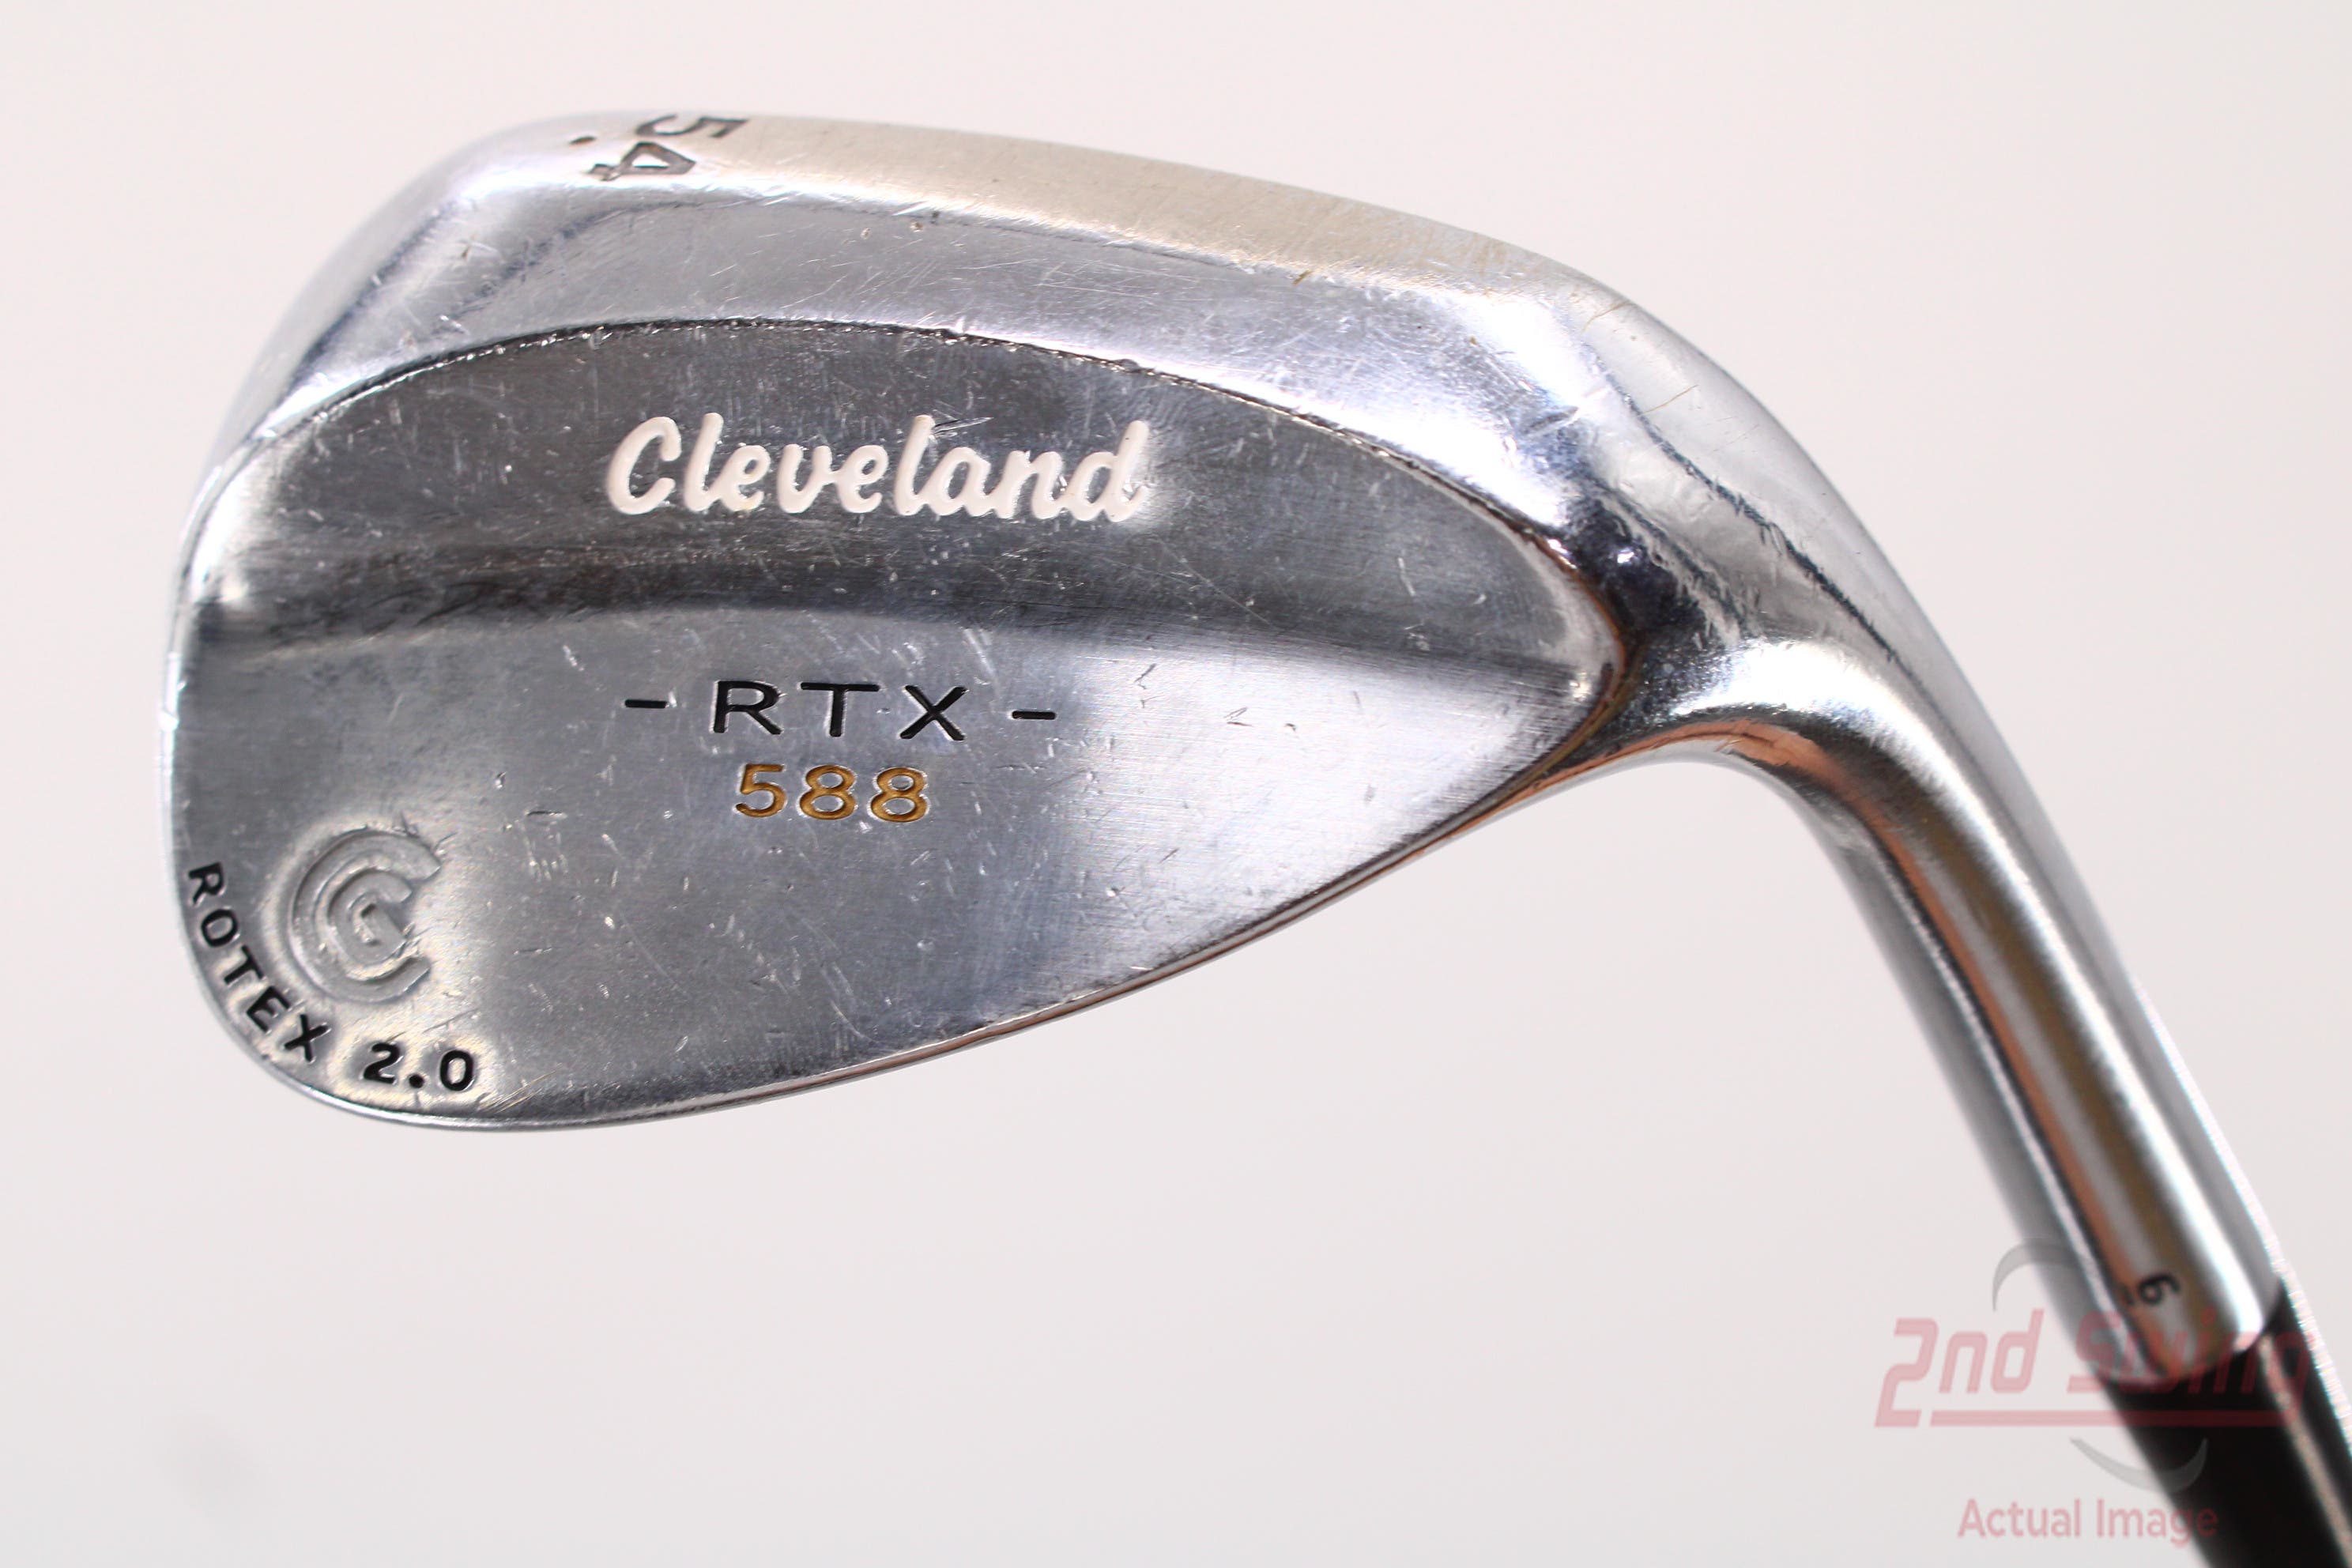 flyde over Gutter Milestone Cleveland 588 RTX 2.0 Tour Satin Wedge (A-62331728469) | 2nd Swing Golf